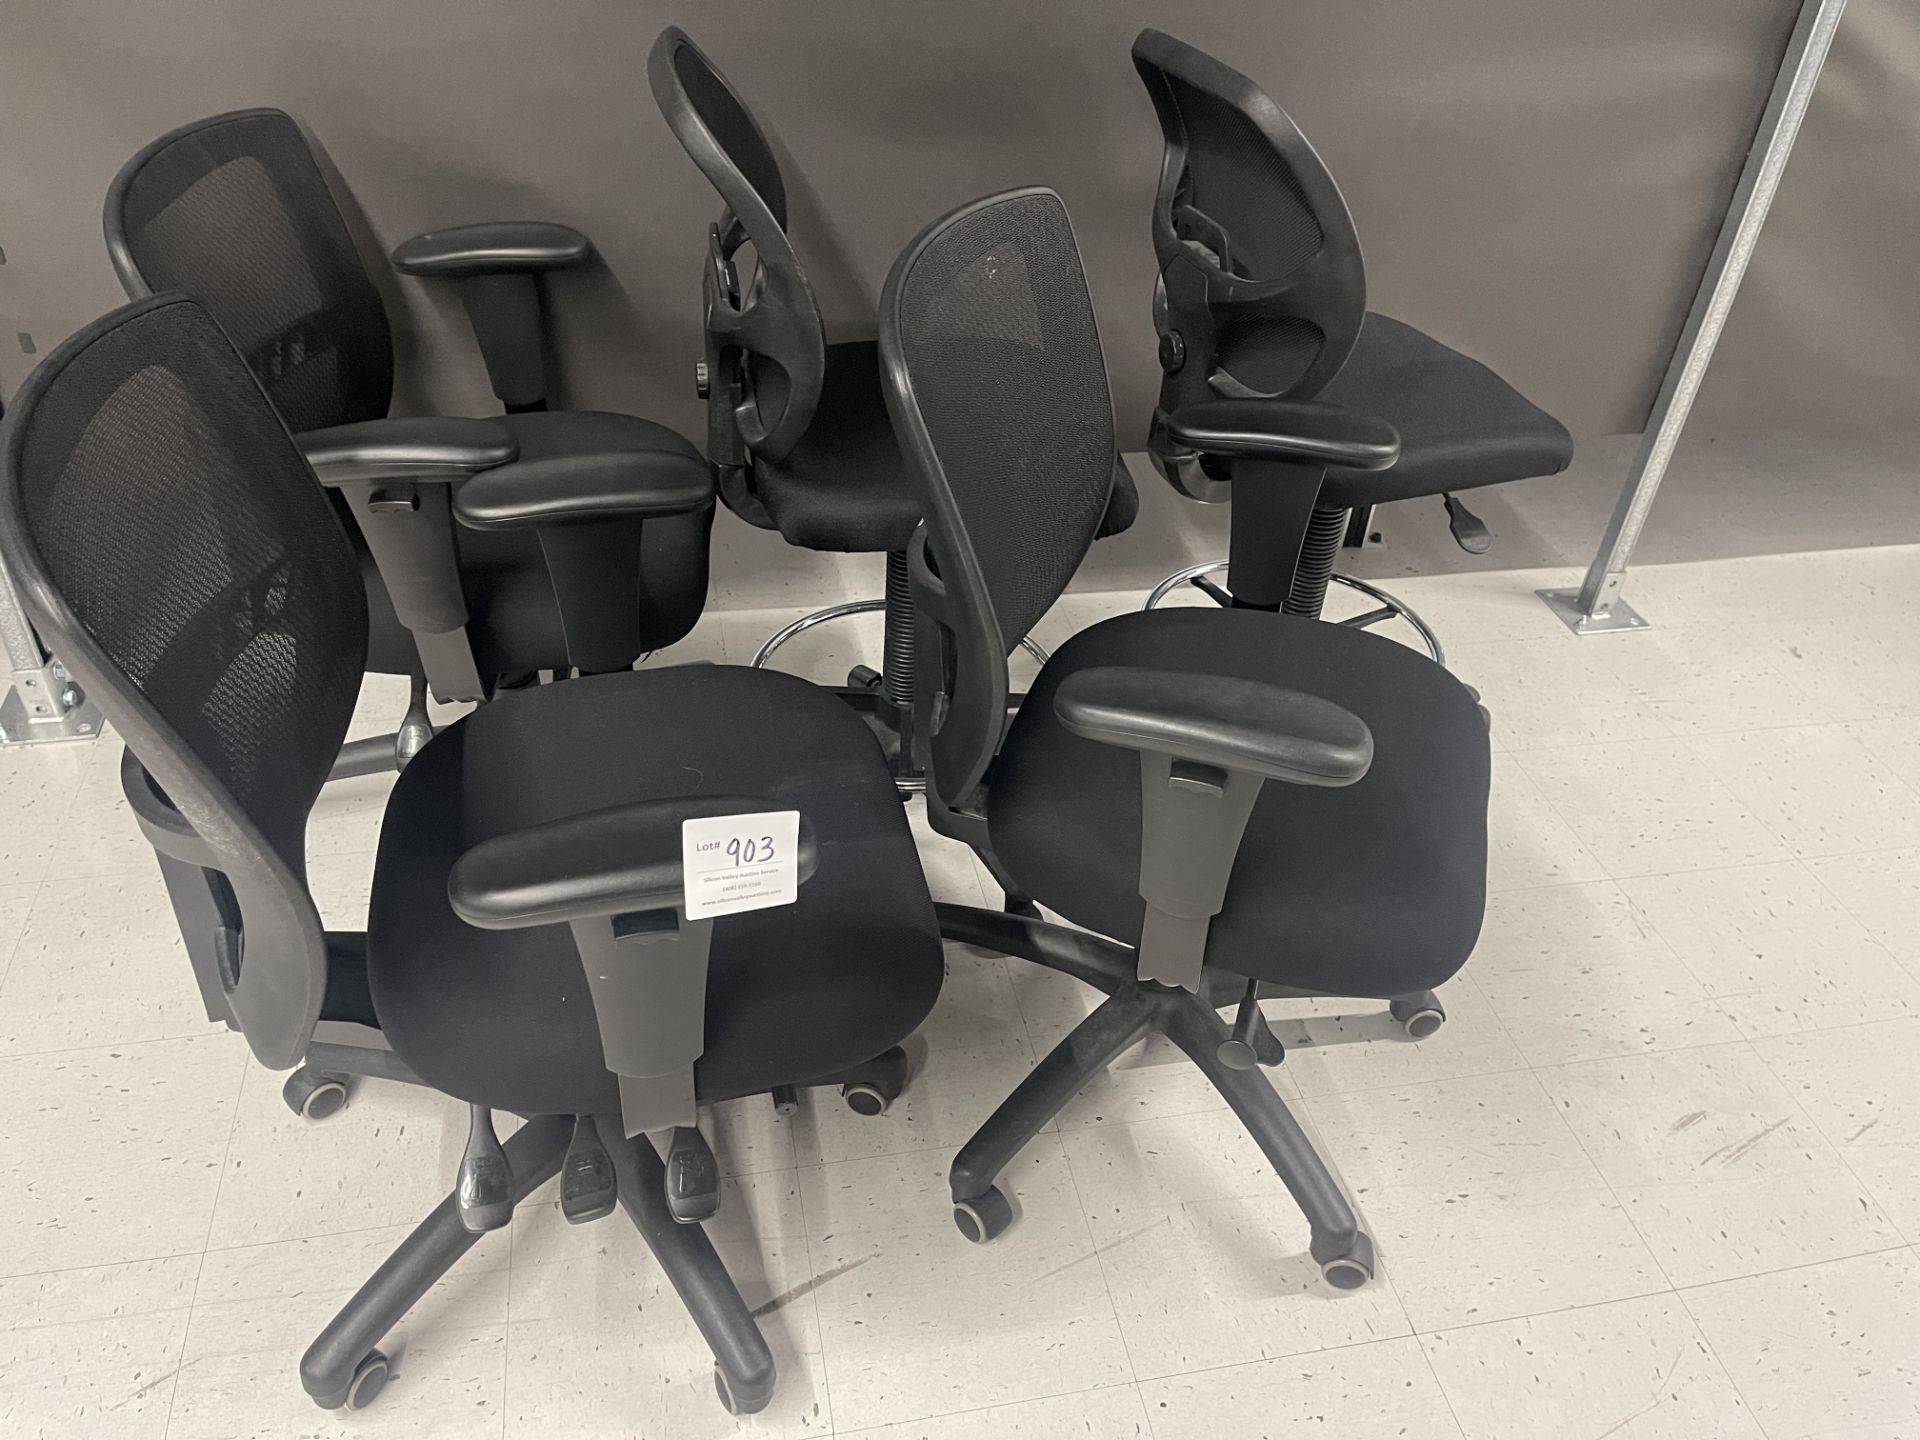 Qty five - Black office chairs